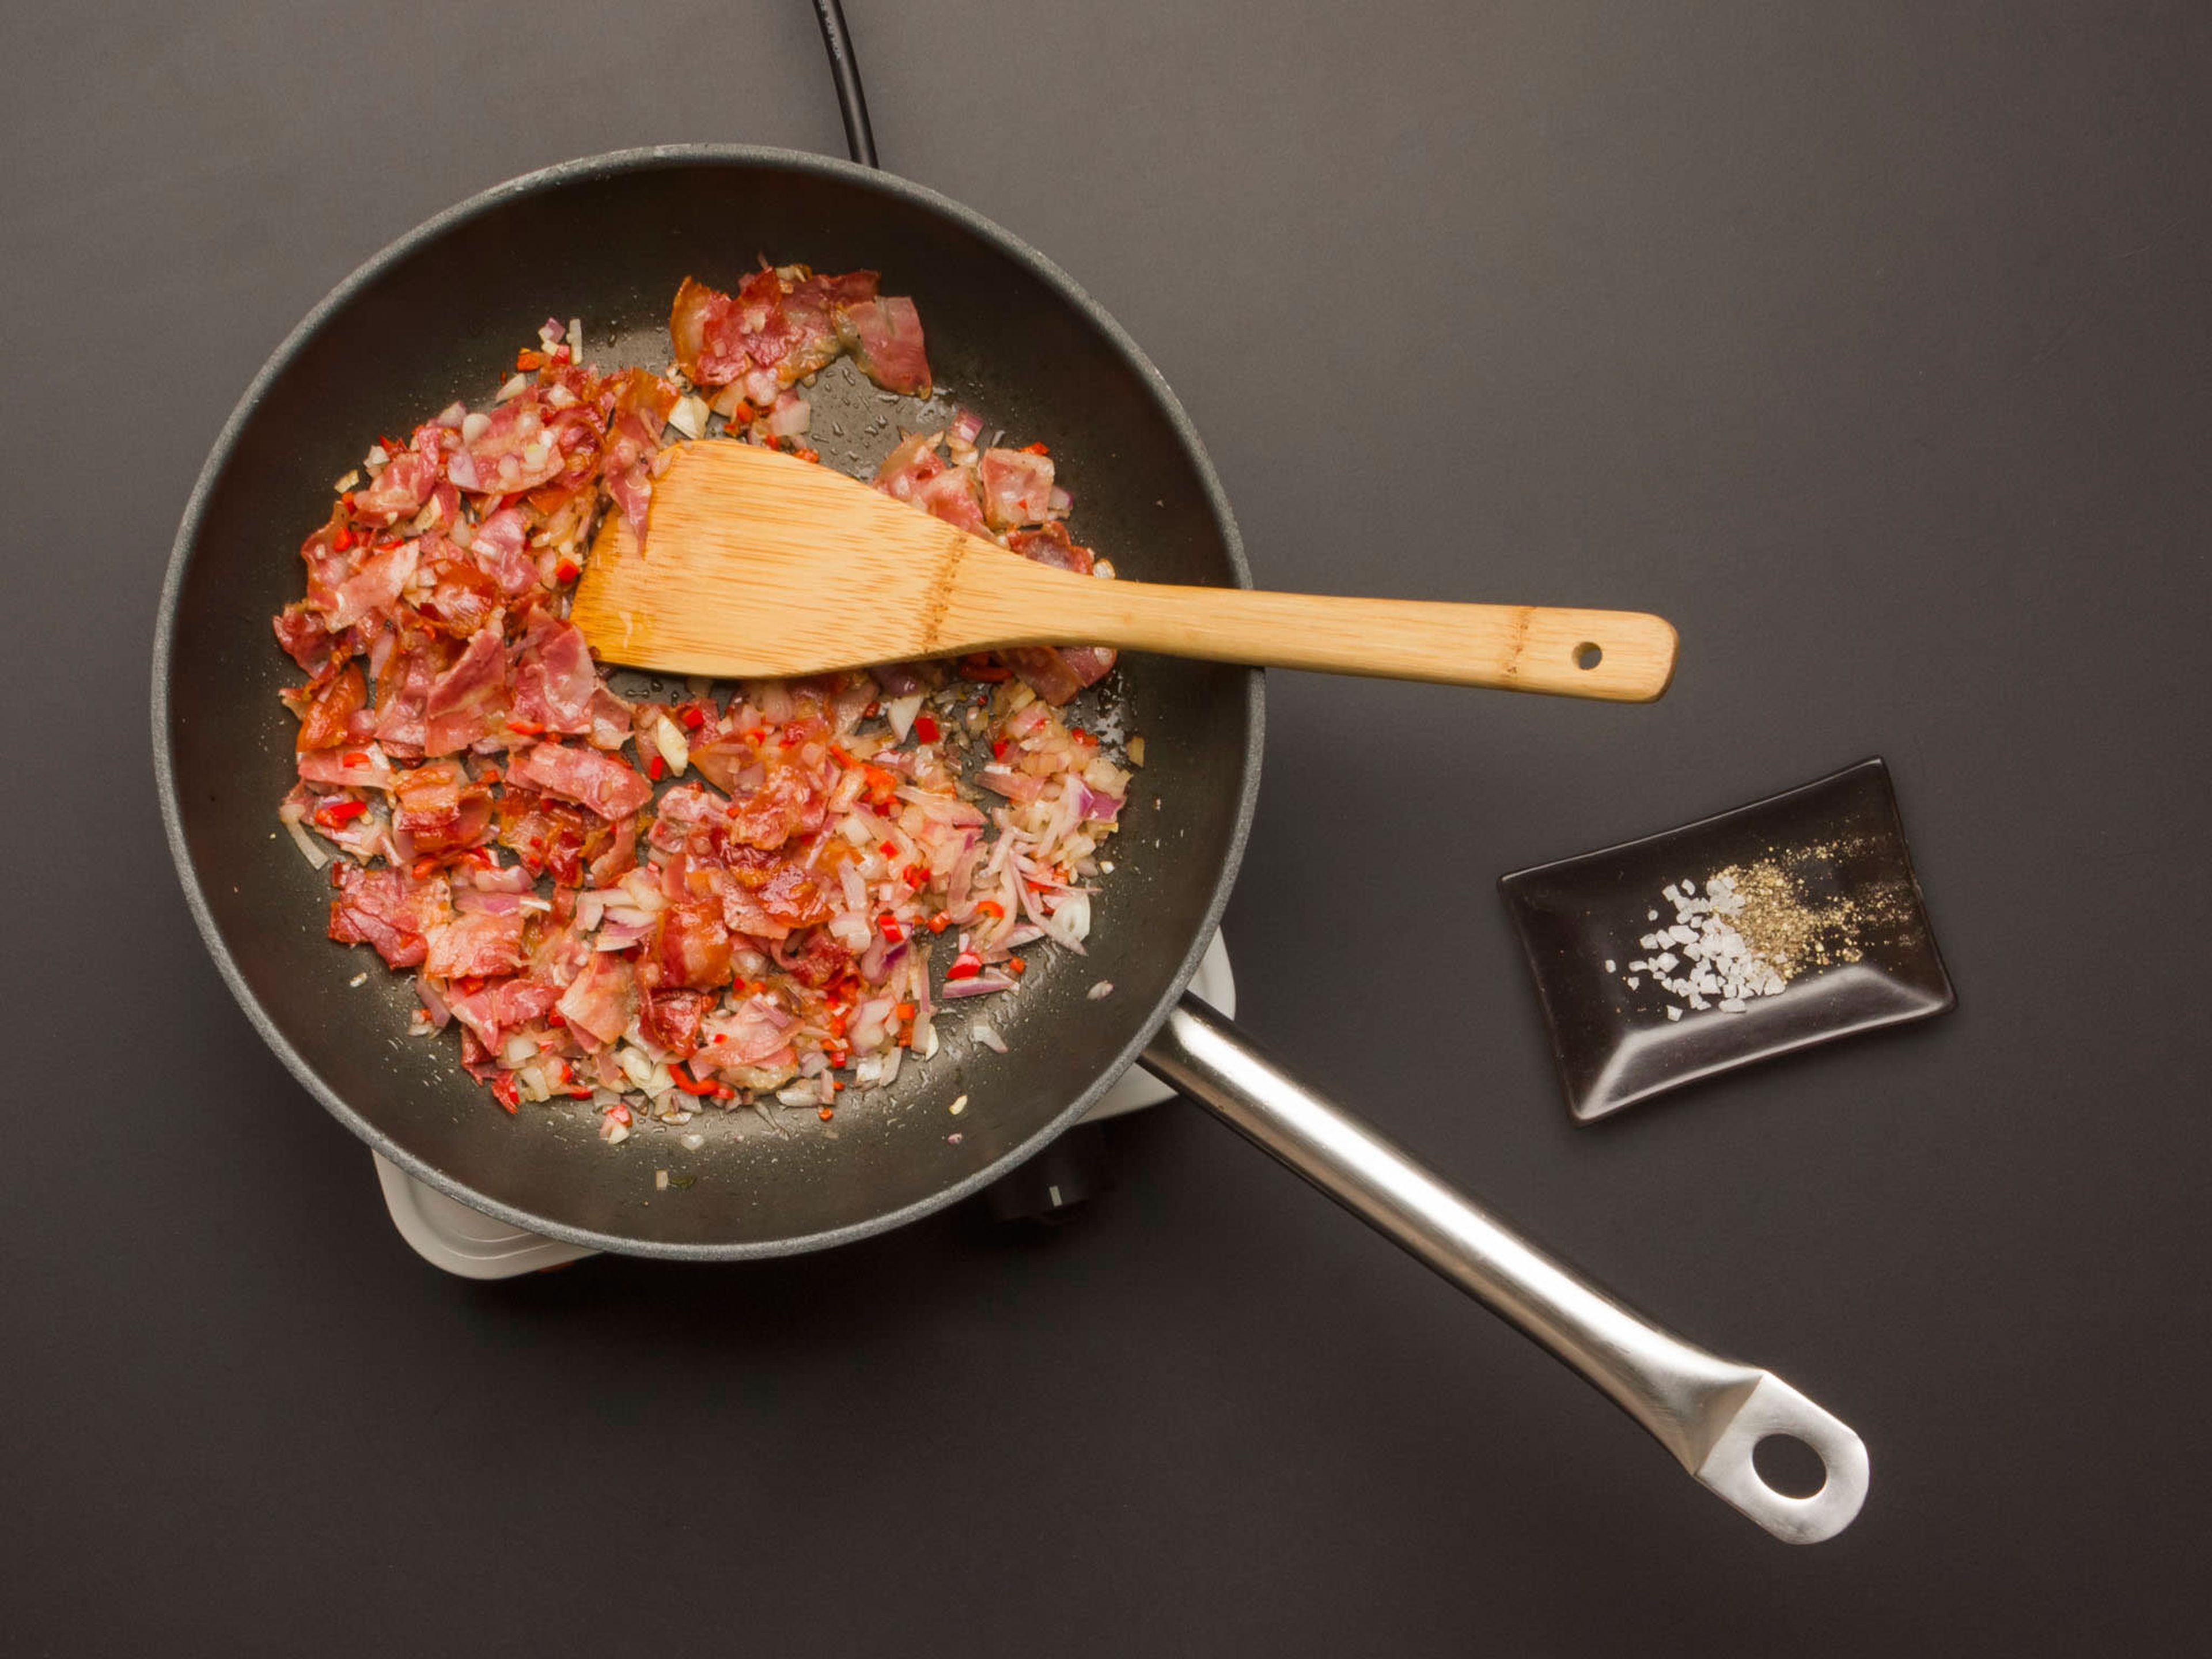 In same frying pan, cook pancetta over high heat for approx. 3 min. Then add garlic, onion, and peperoncino and continue to cook for another 2 min. over medium heat. Season to taste with salt and pepper.